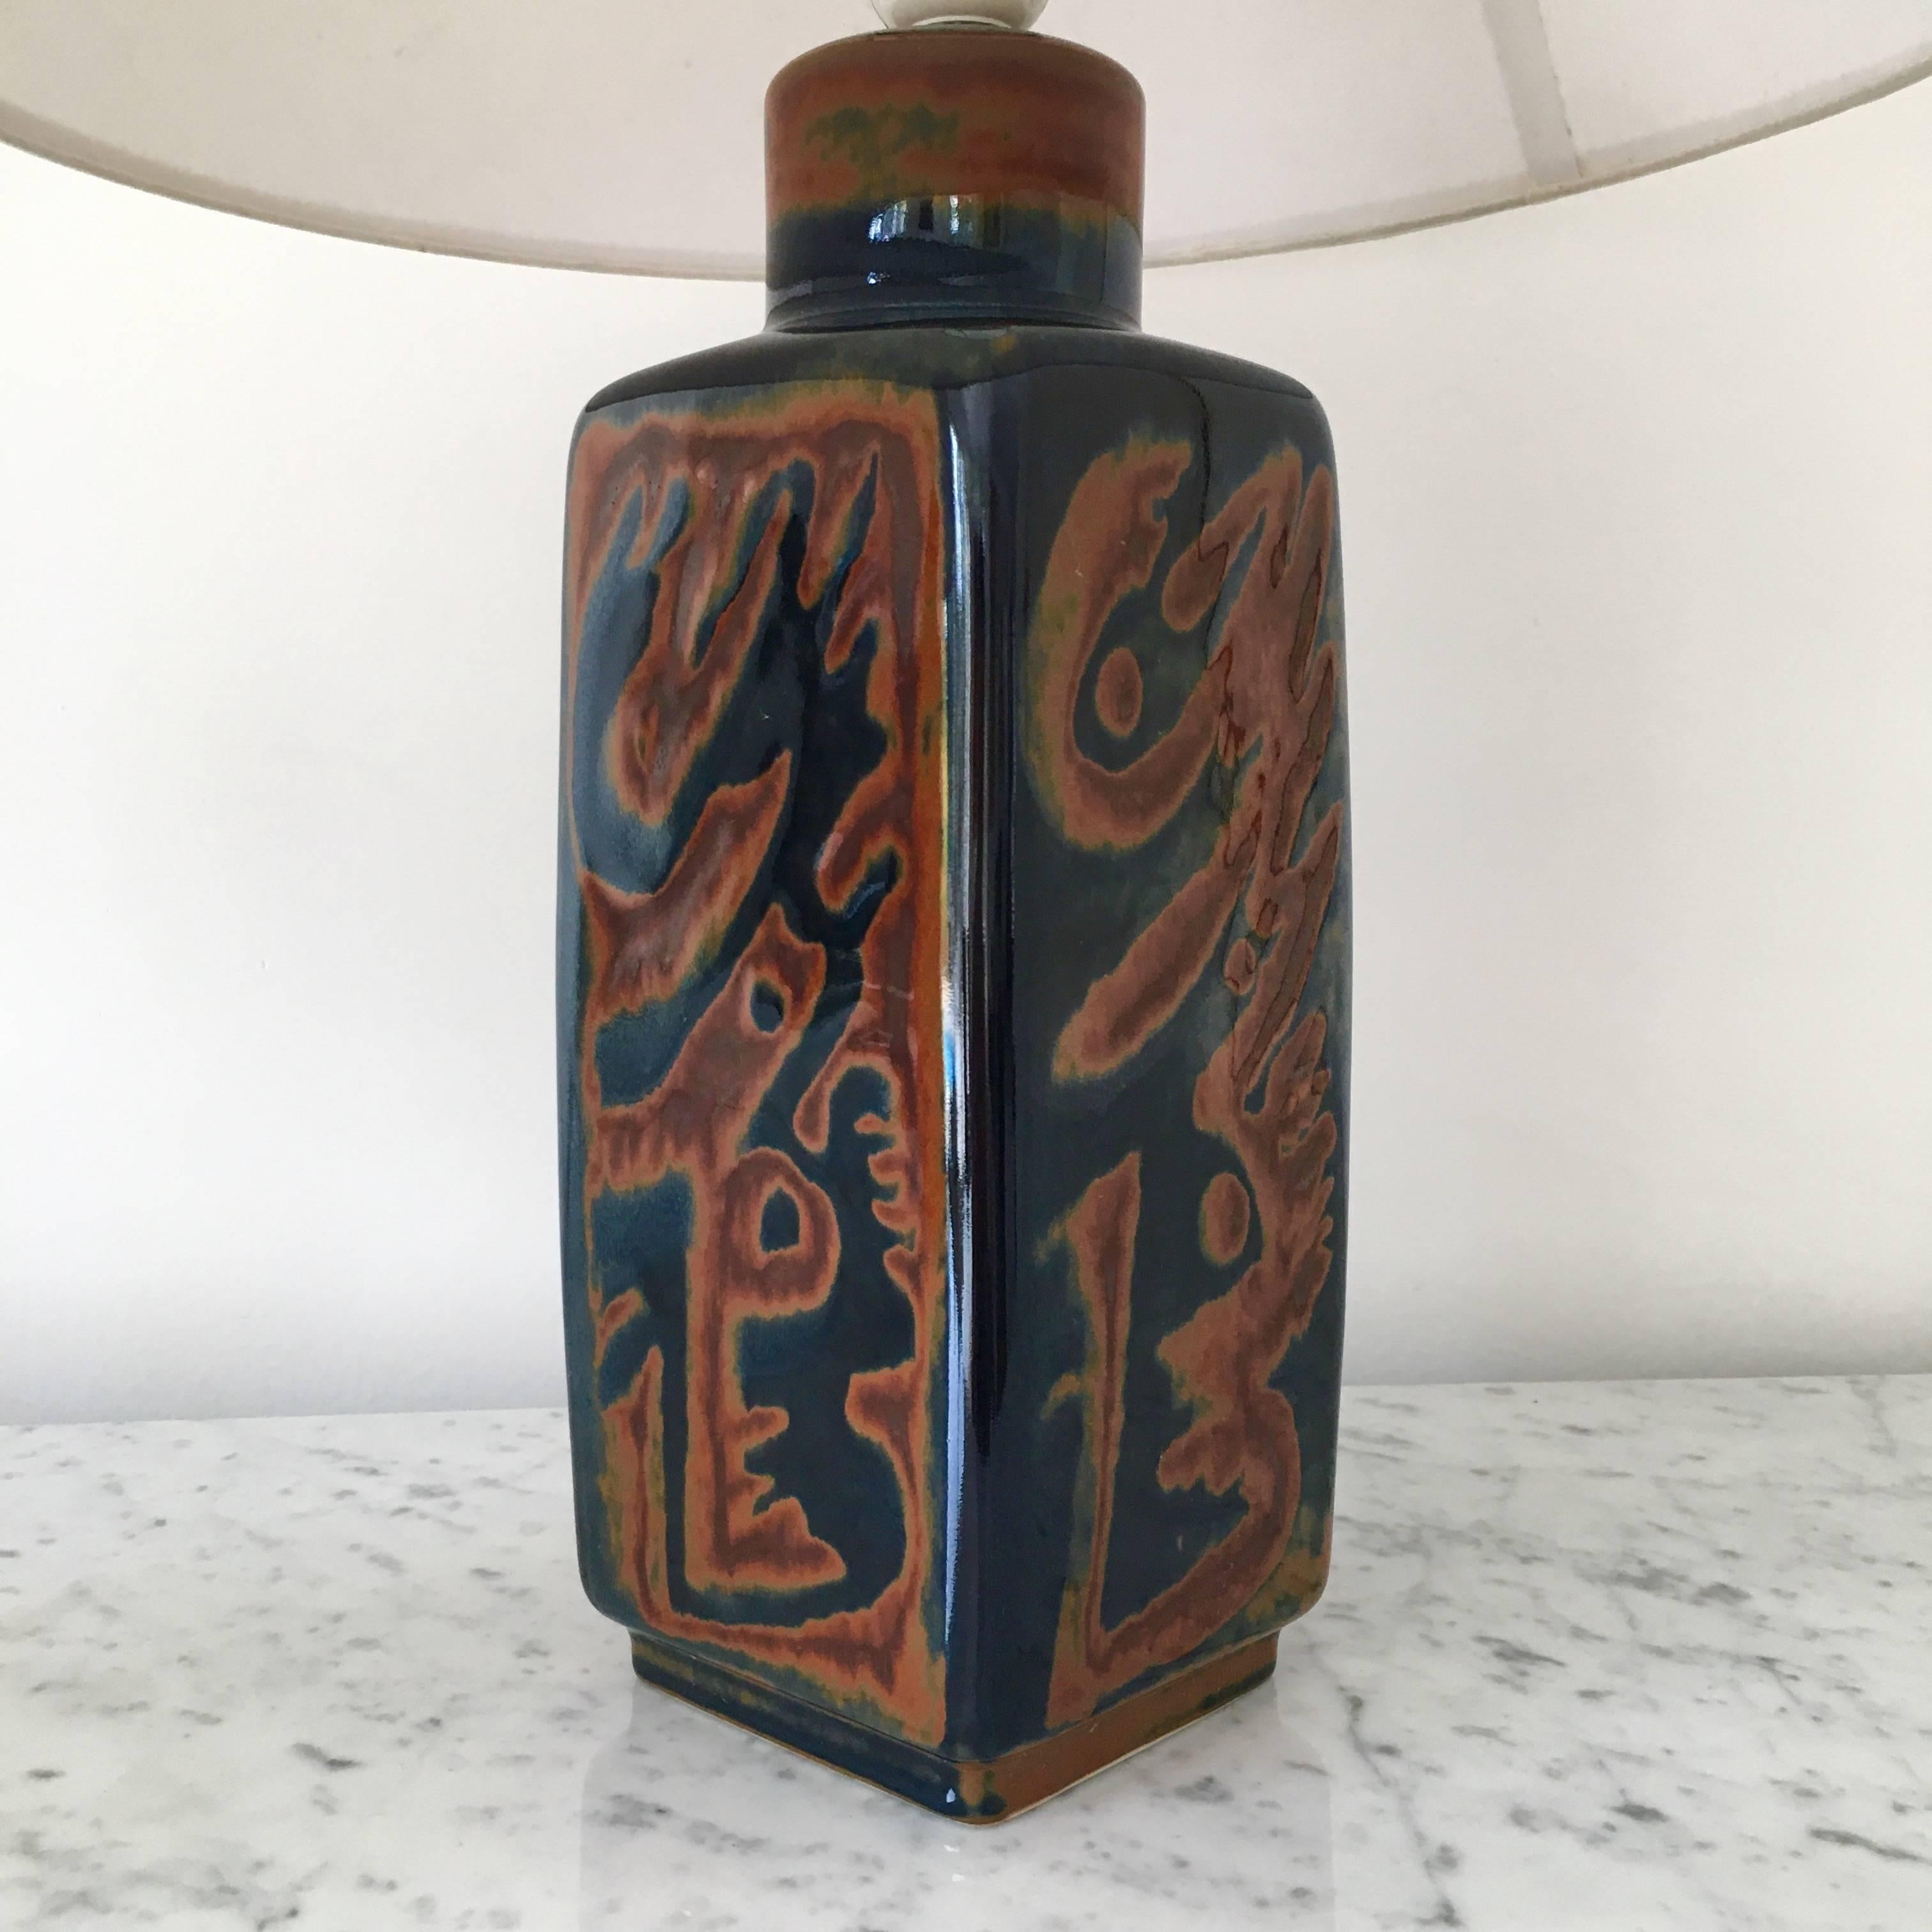 Rare and elegant pair of table lamps by Carl Harry Stalhane;
brown and blue glazed ceramic;
Manufactured by Rörstrand, Sweden, circa 1960.